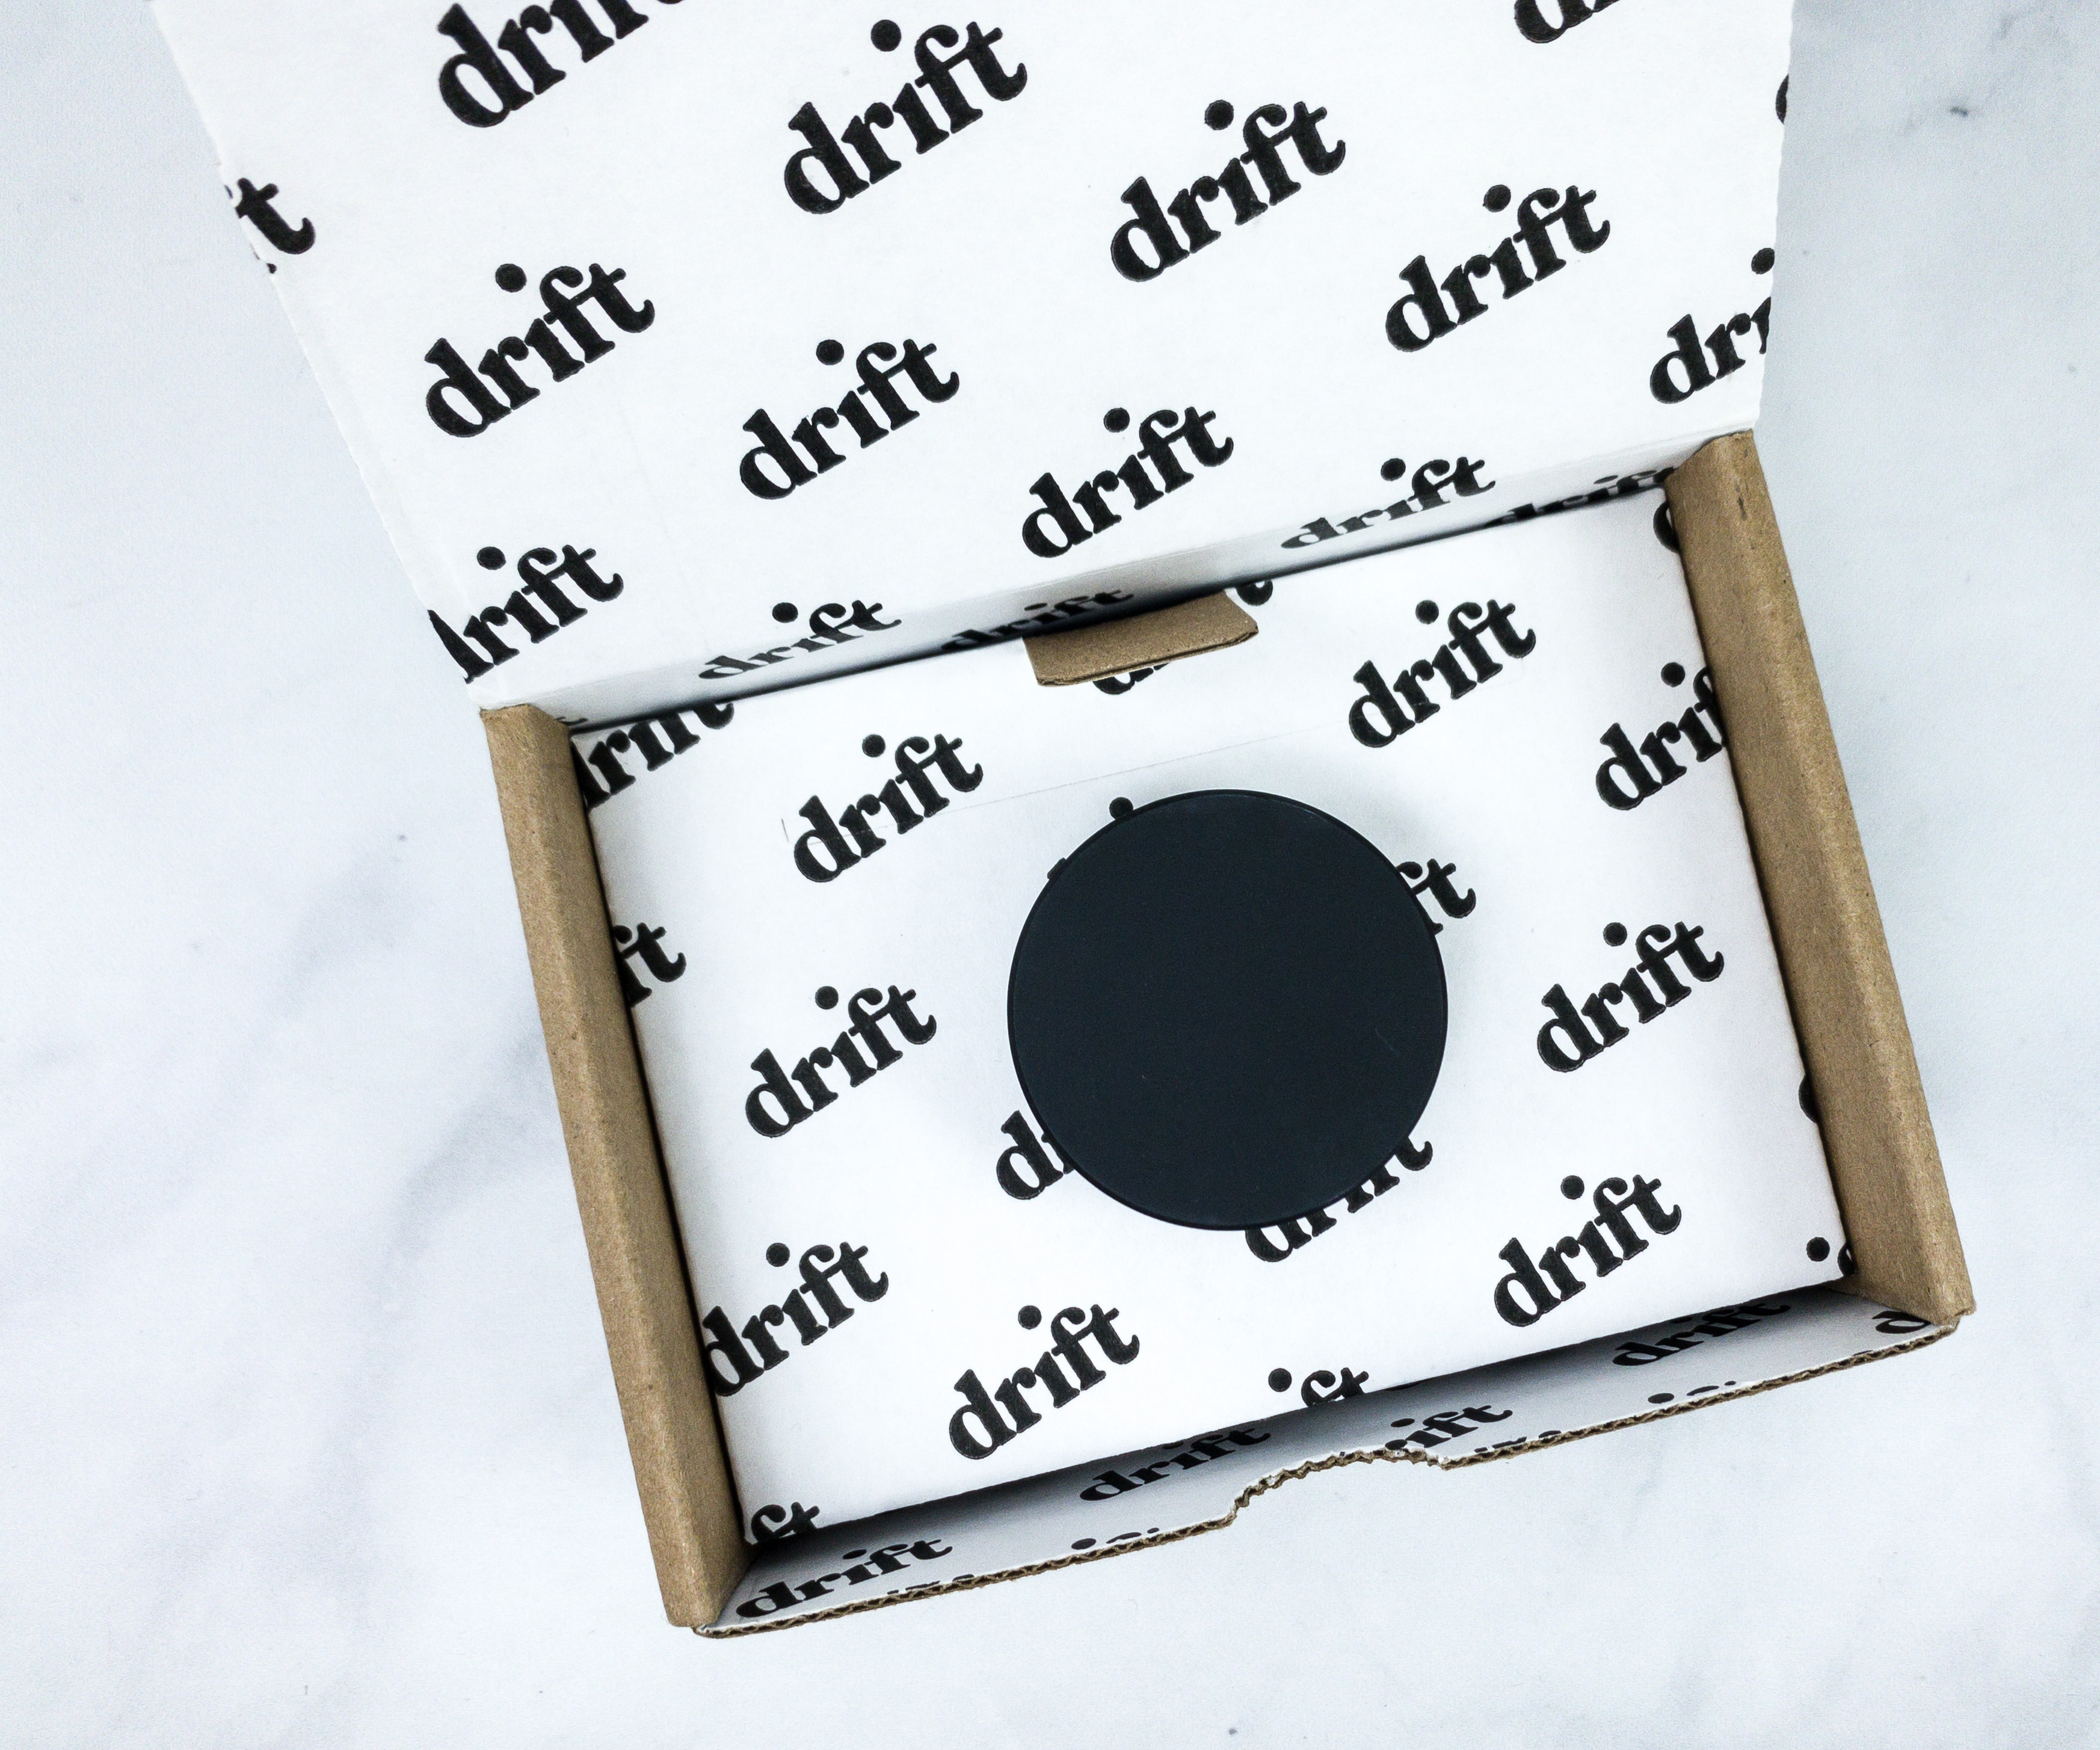 Drift Car Freshener Subscription Review Coupon - Rove - Hello Subscription